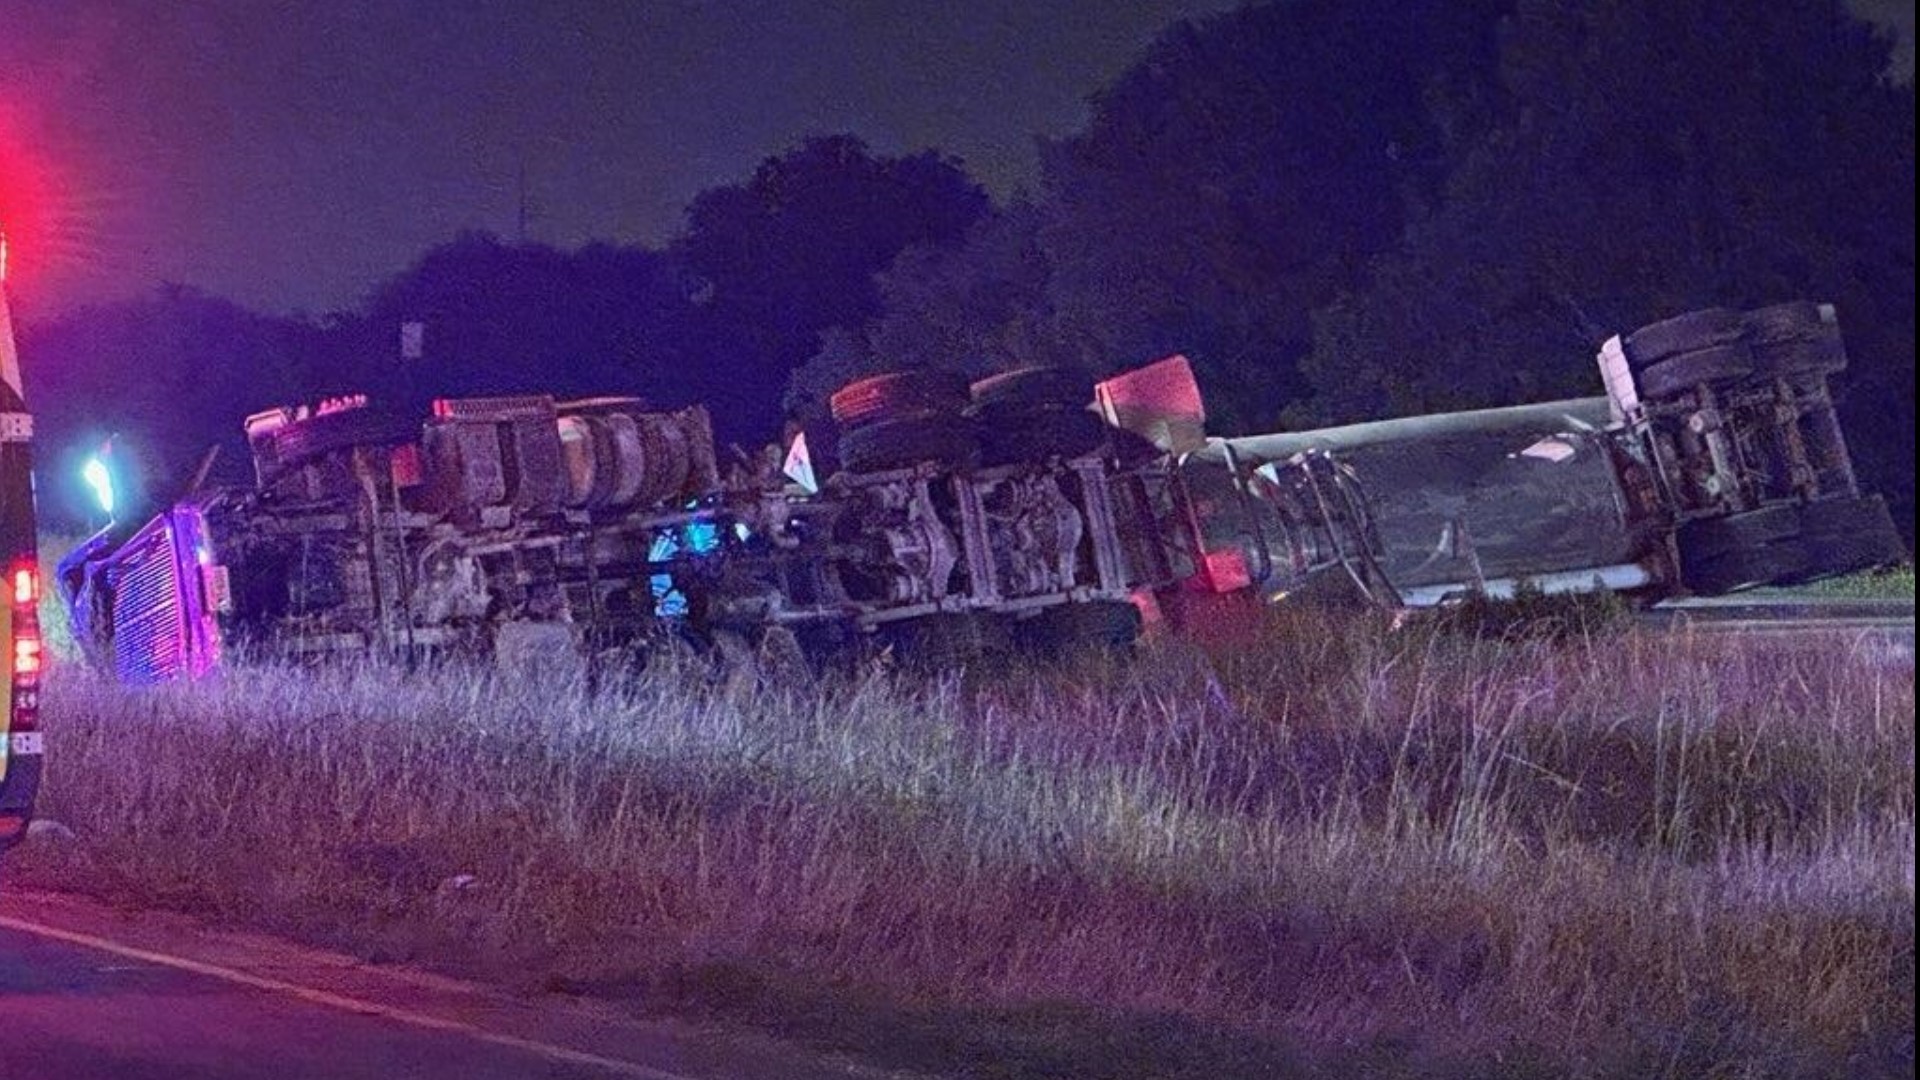 Police say a semi-truck driver failed to control their speed and struck another vehicle.